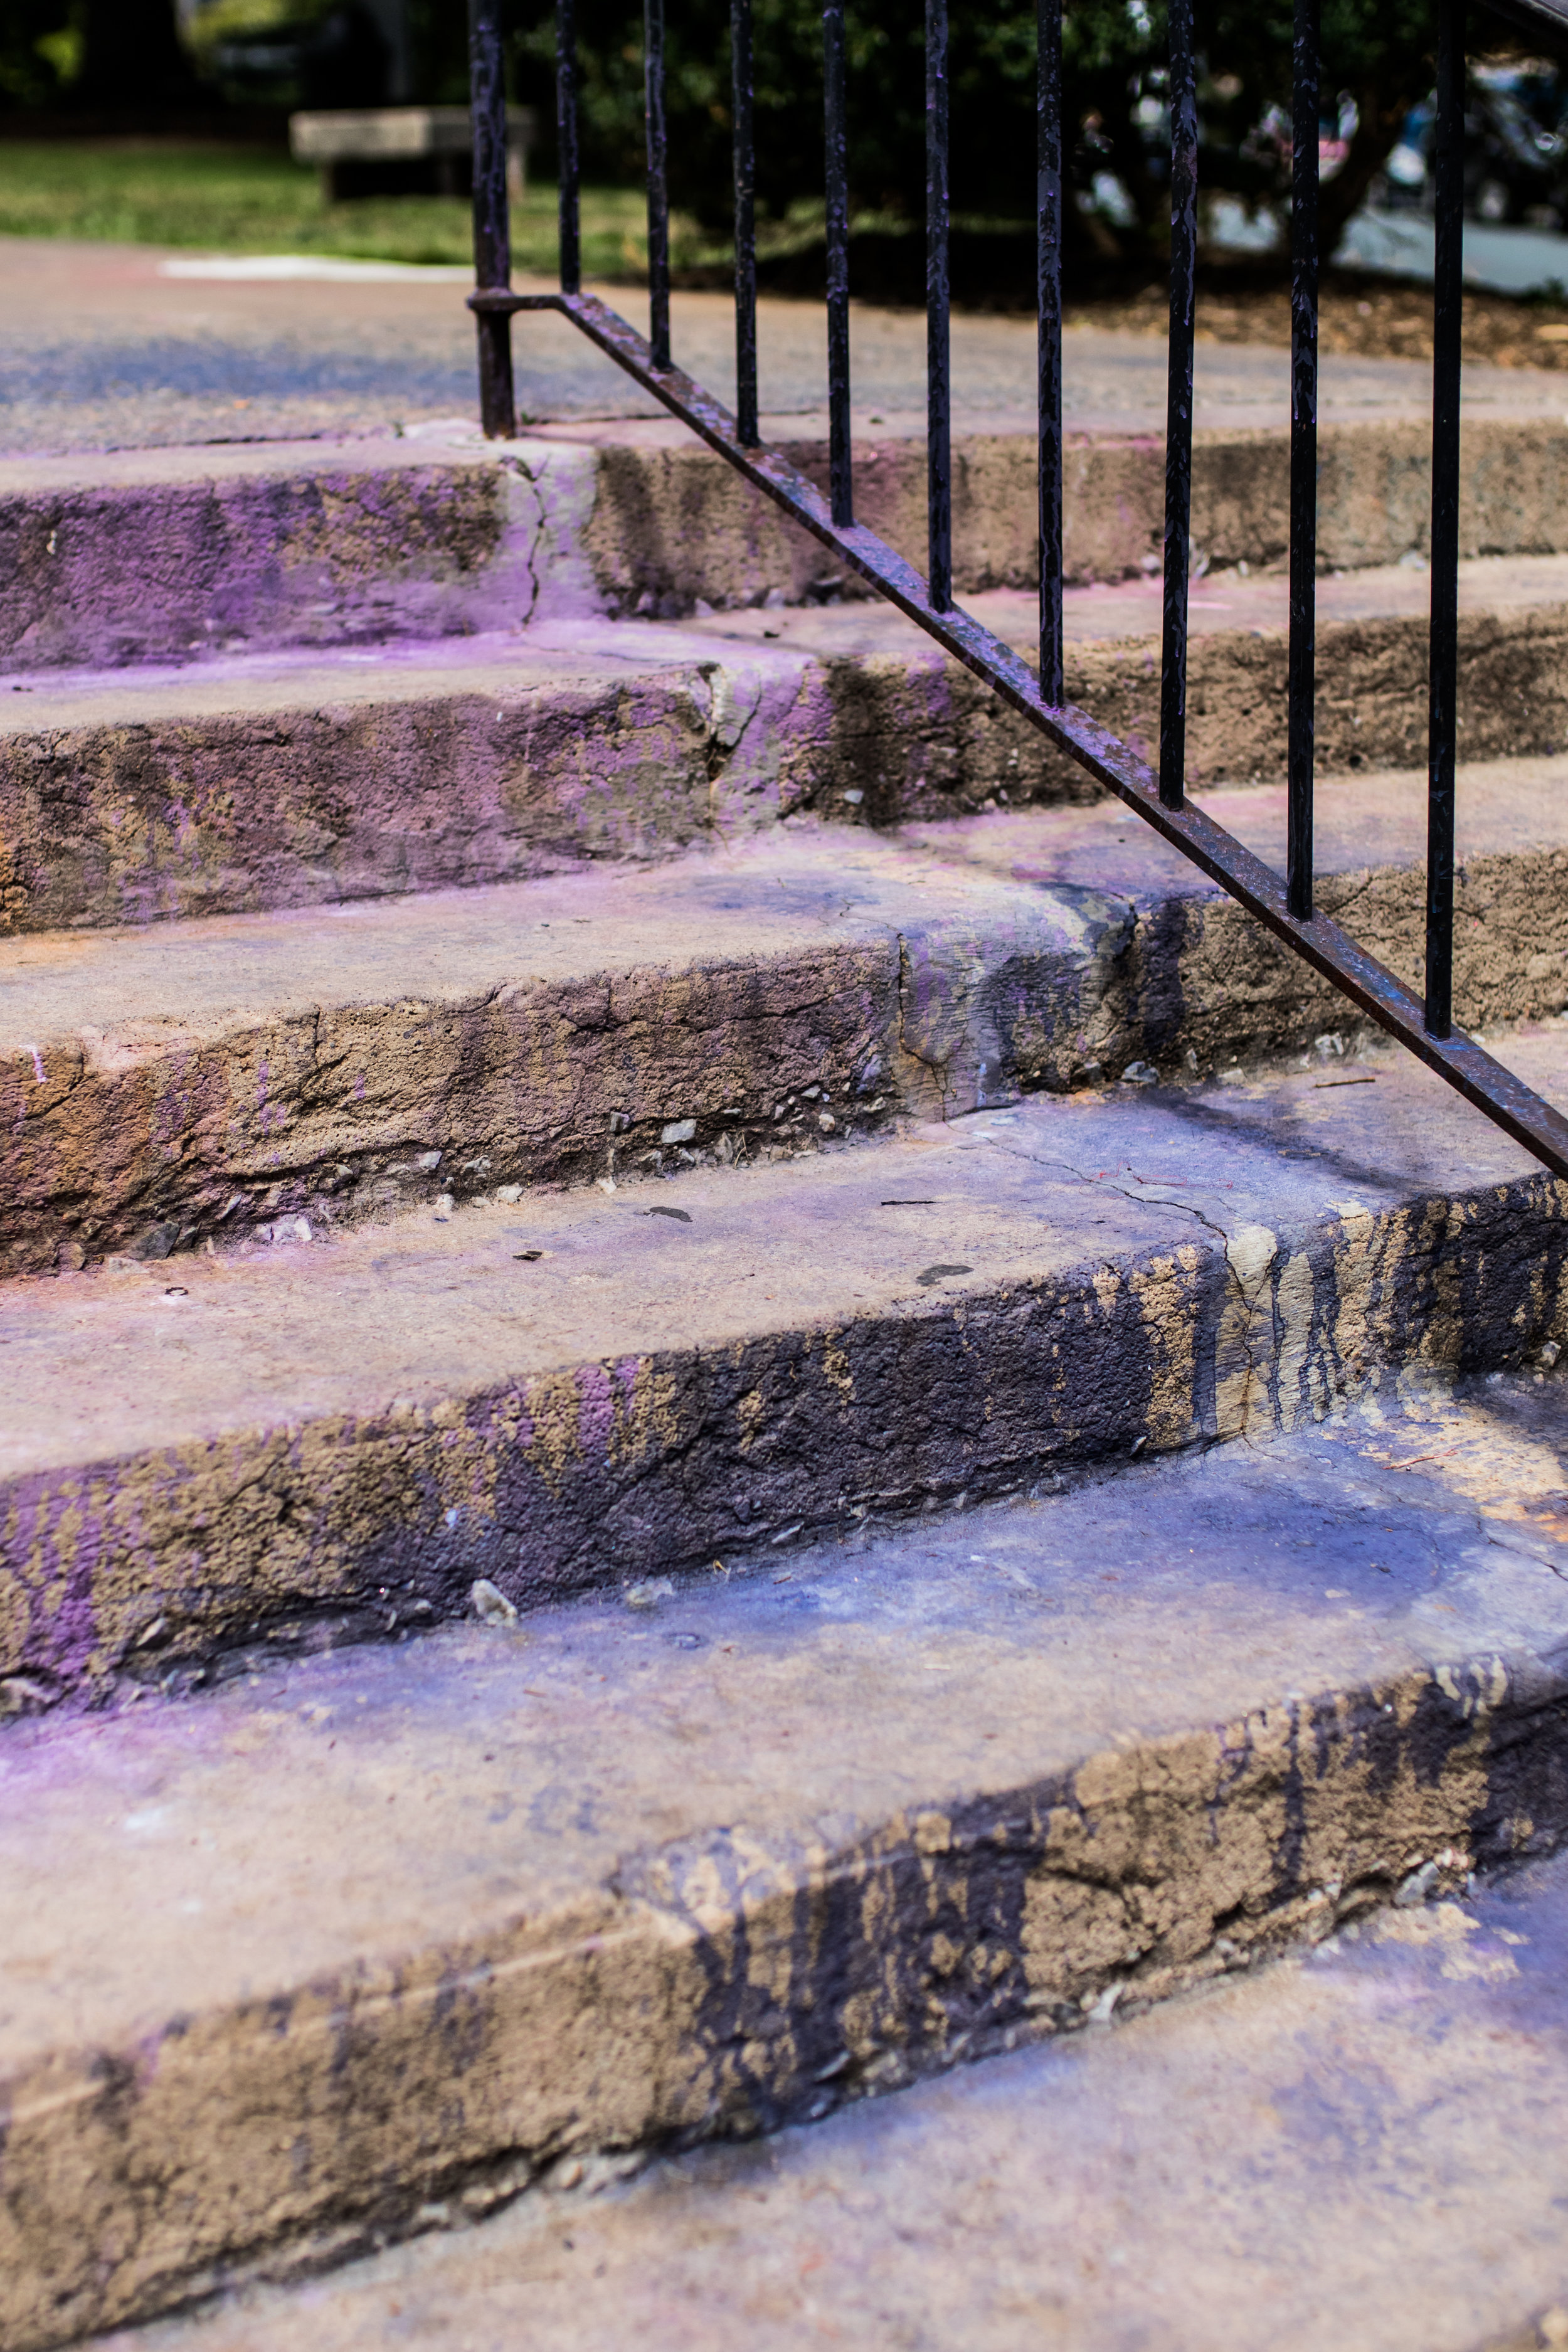  Steps leading to Emancipation Park - ironically covered in purple because of residue from smoke grenades.&nbsp; 